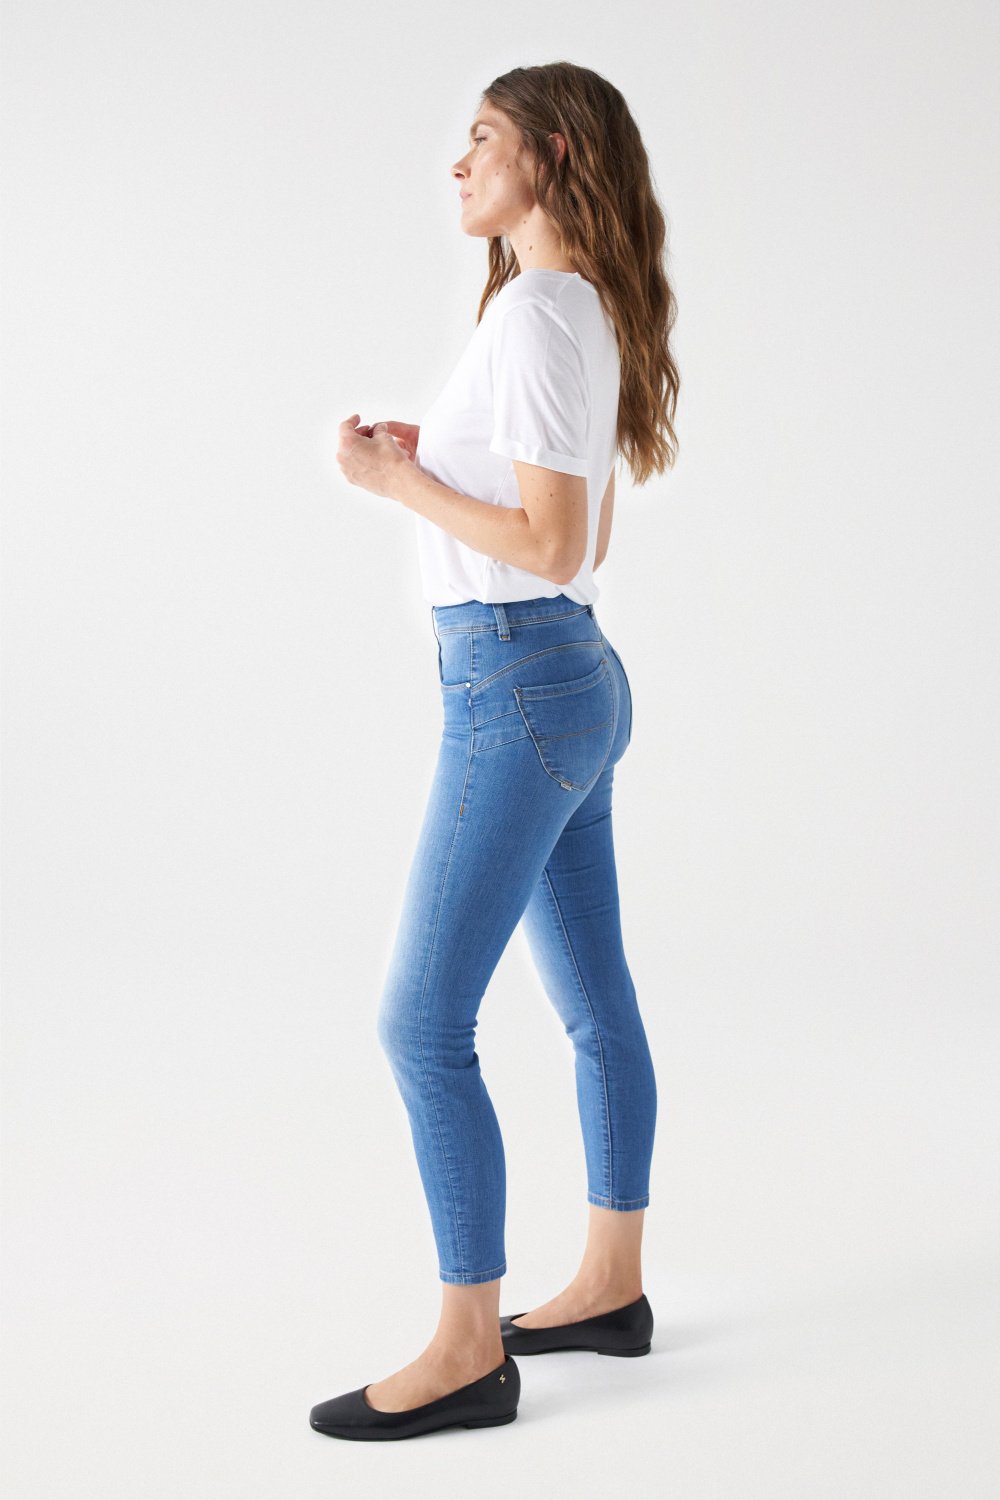 Jeans Secret, Push In, Skinny, helle Waschung - Salsa